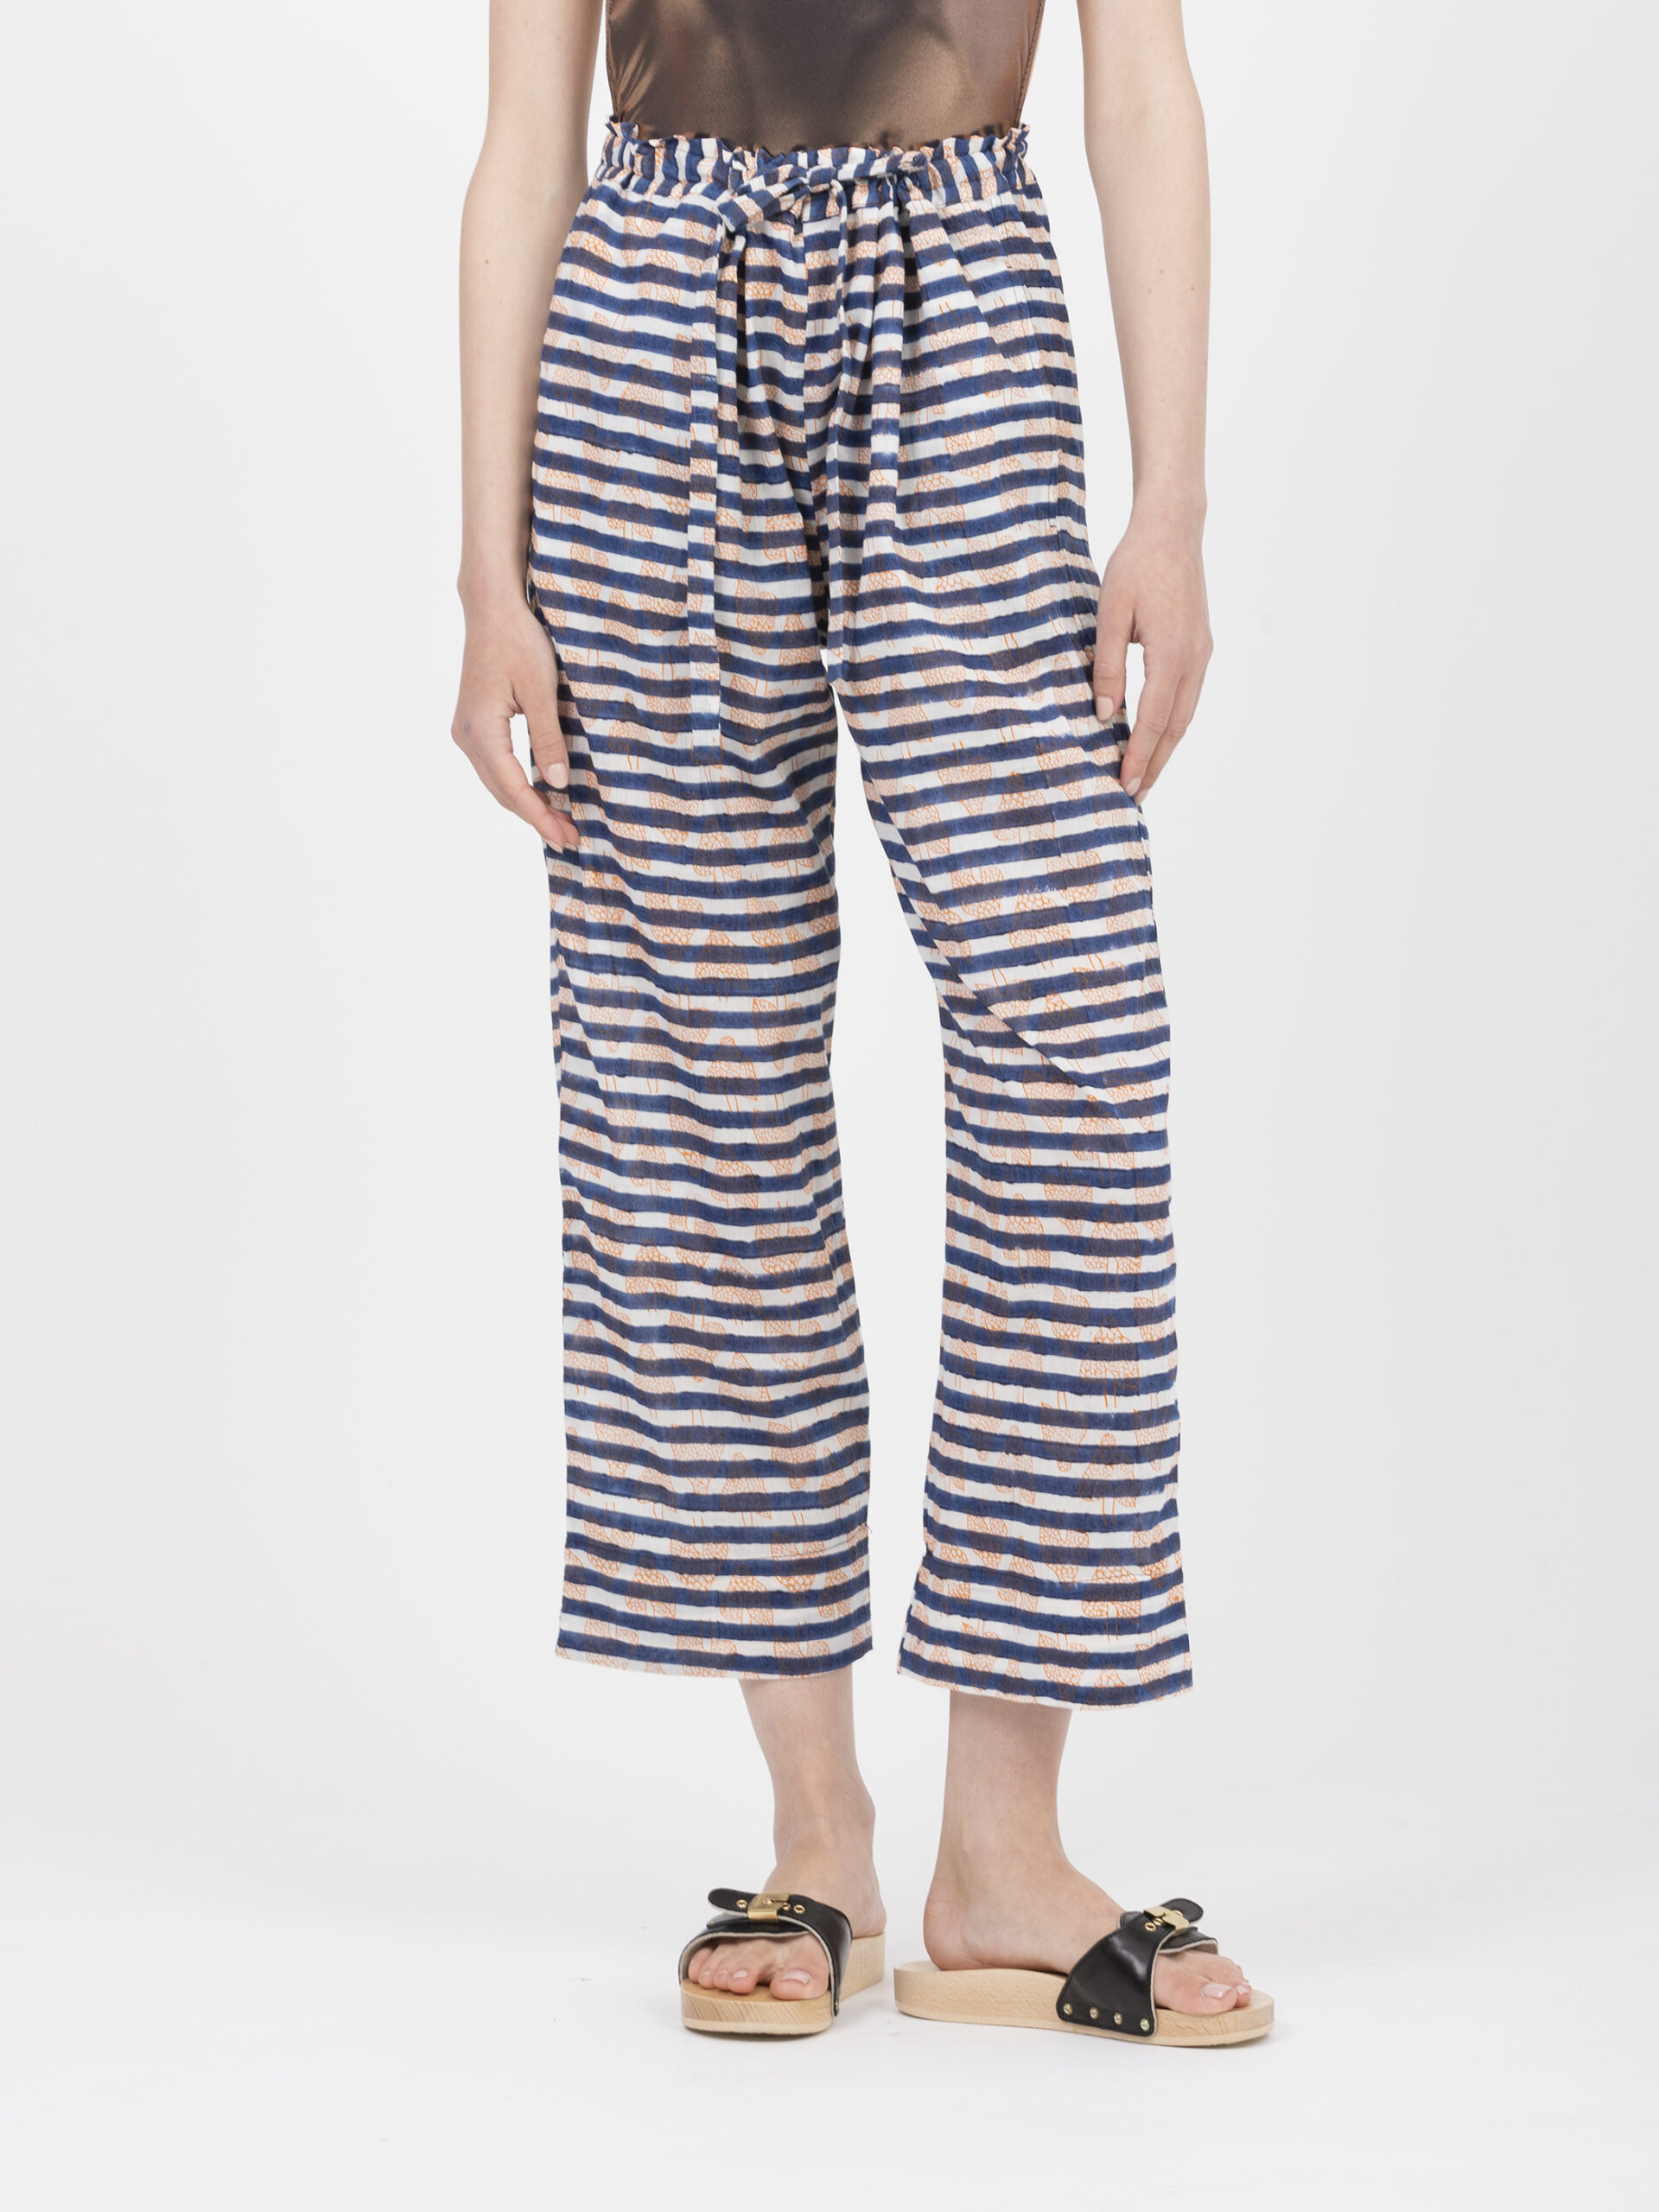 circa-voile-cotton-trousers-drawstring-relaxed-kimale-greek-designers-matchboxathens